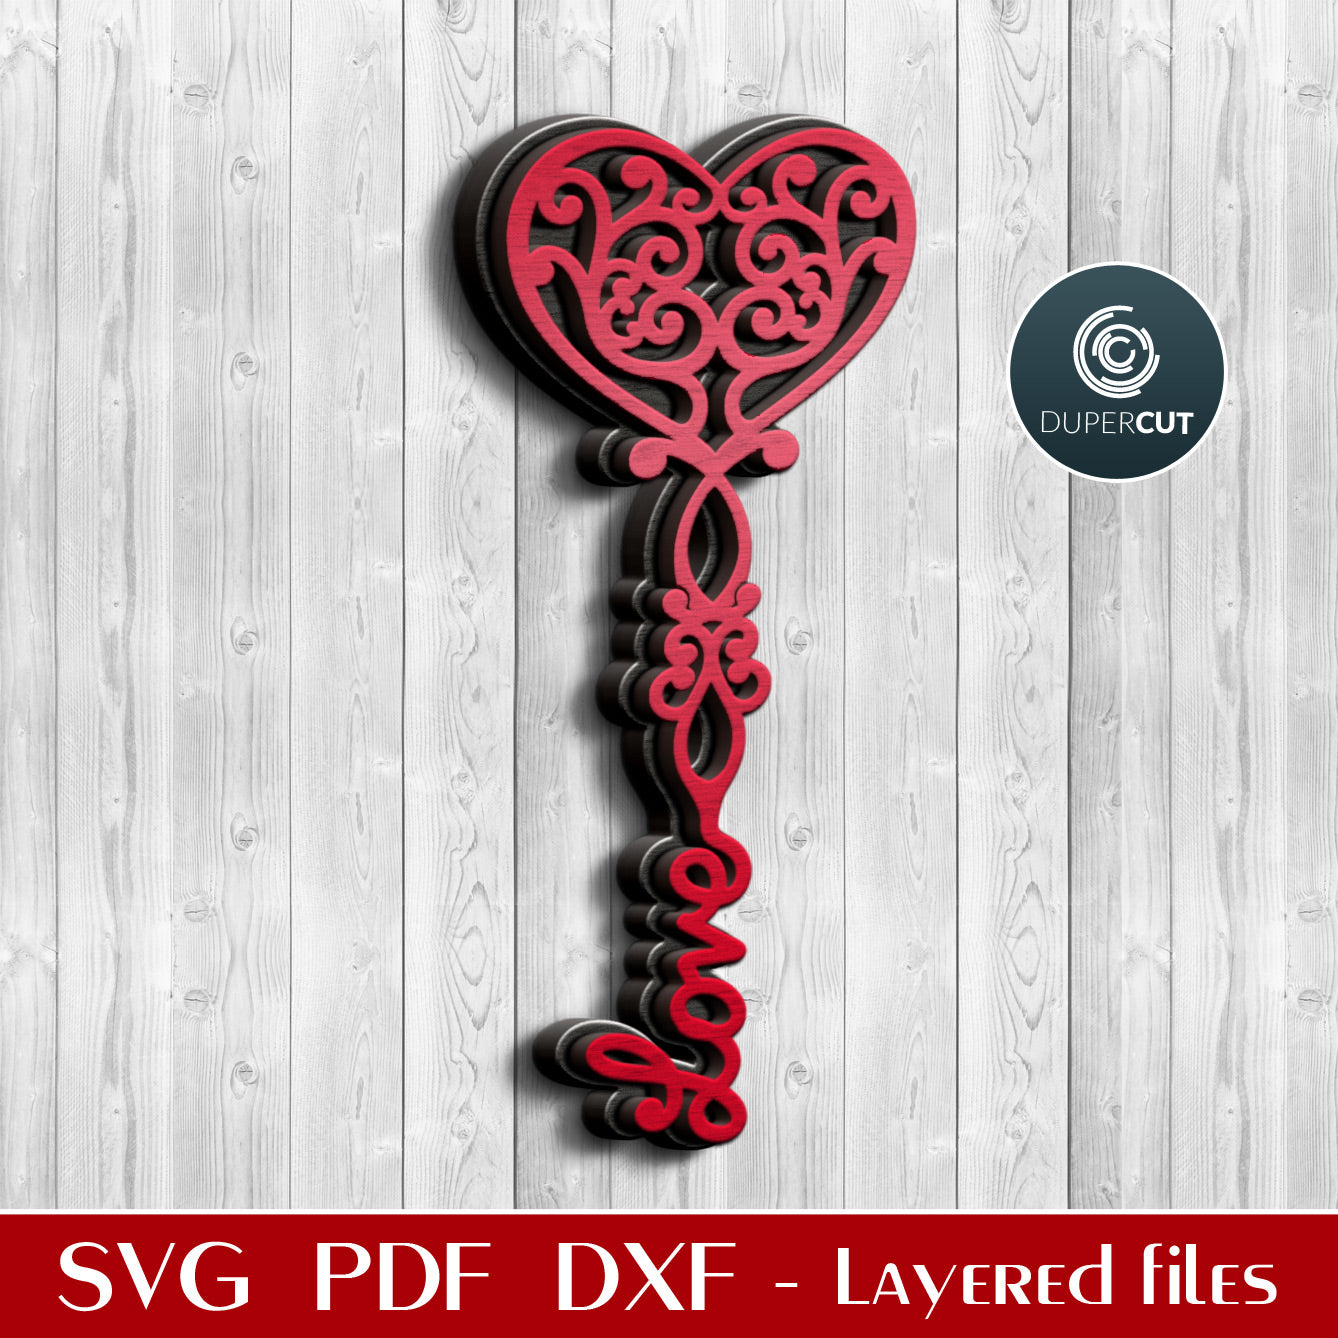 Key to my heart - Valentine's day layered gift SVG DXF vector pattern for Glowforge, Cricut, Silhouette, CNC plasma, scroll saw by DuperCut.com